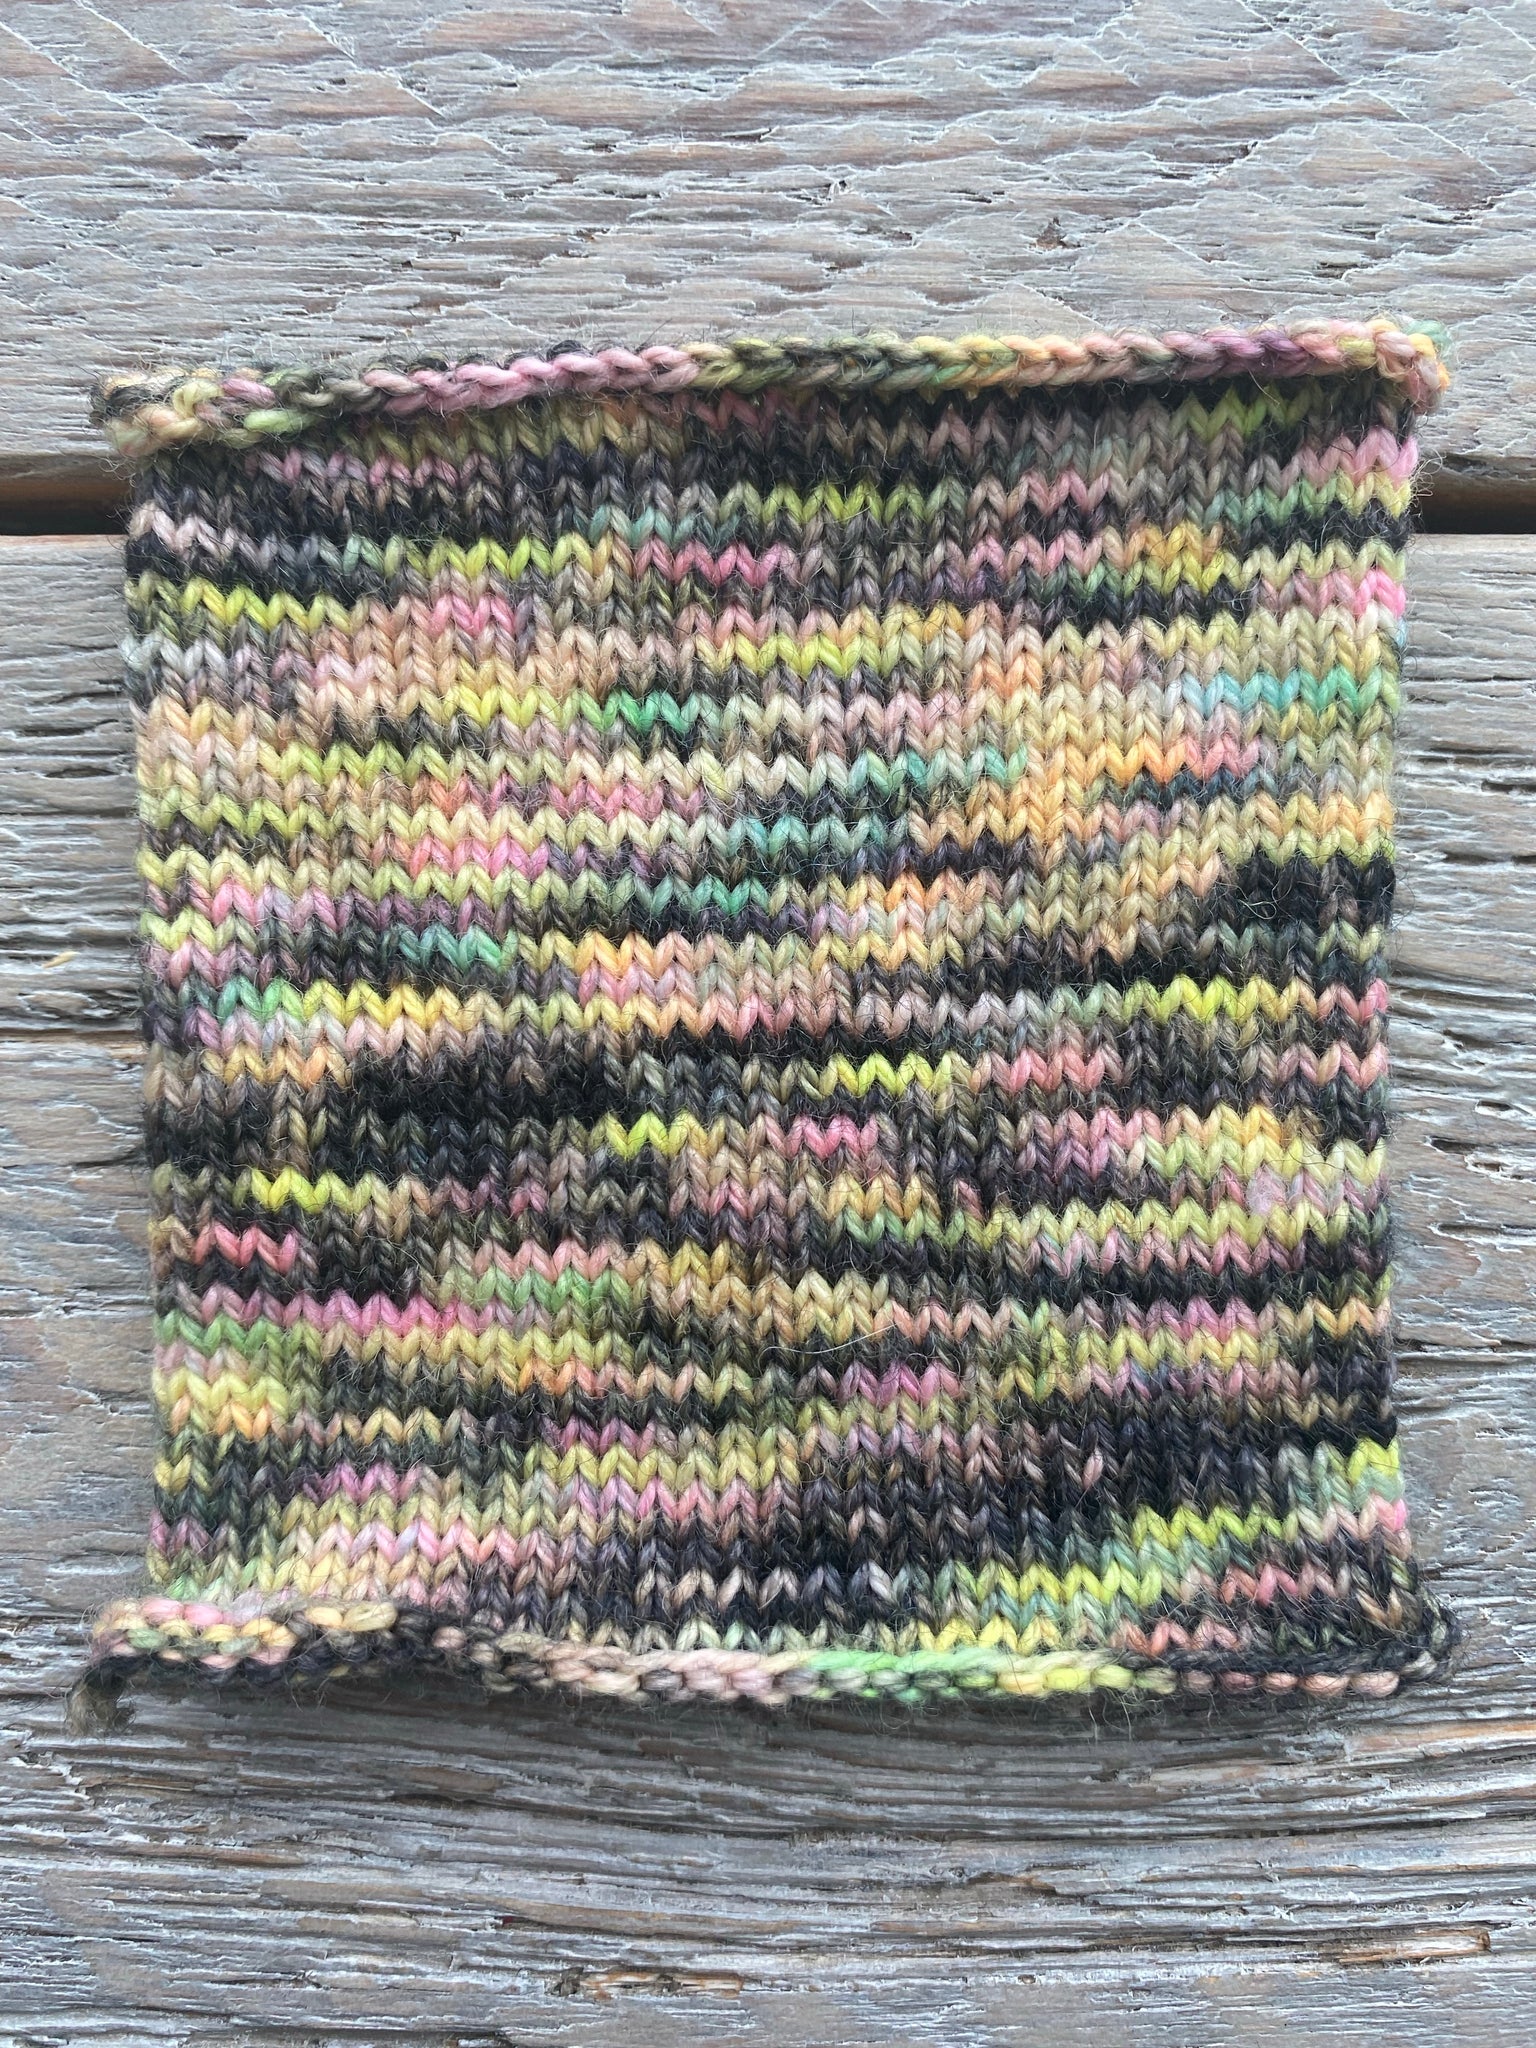 Energy on Classic Worsted - Retired